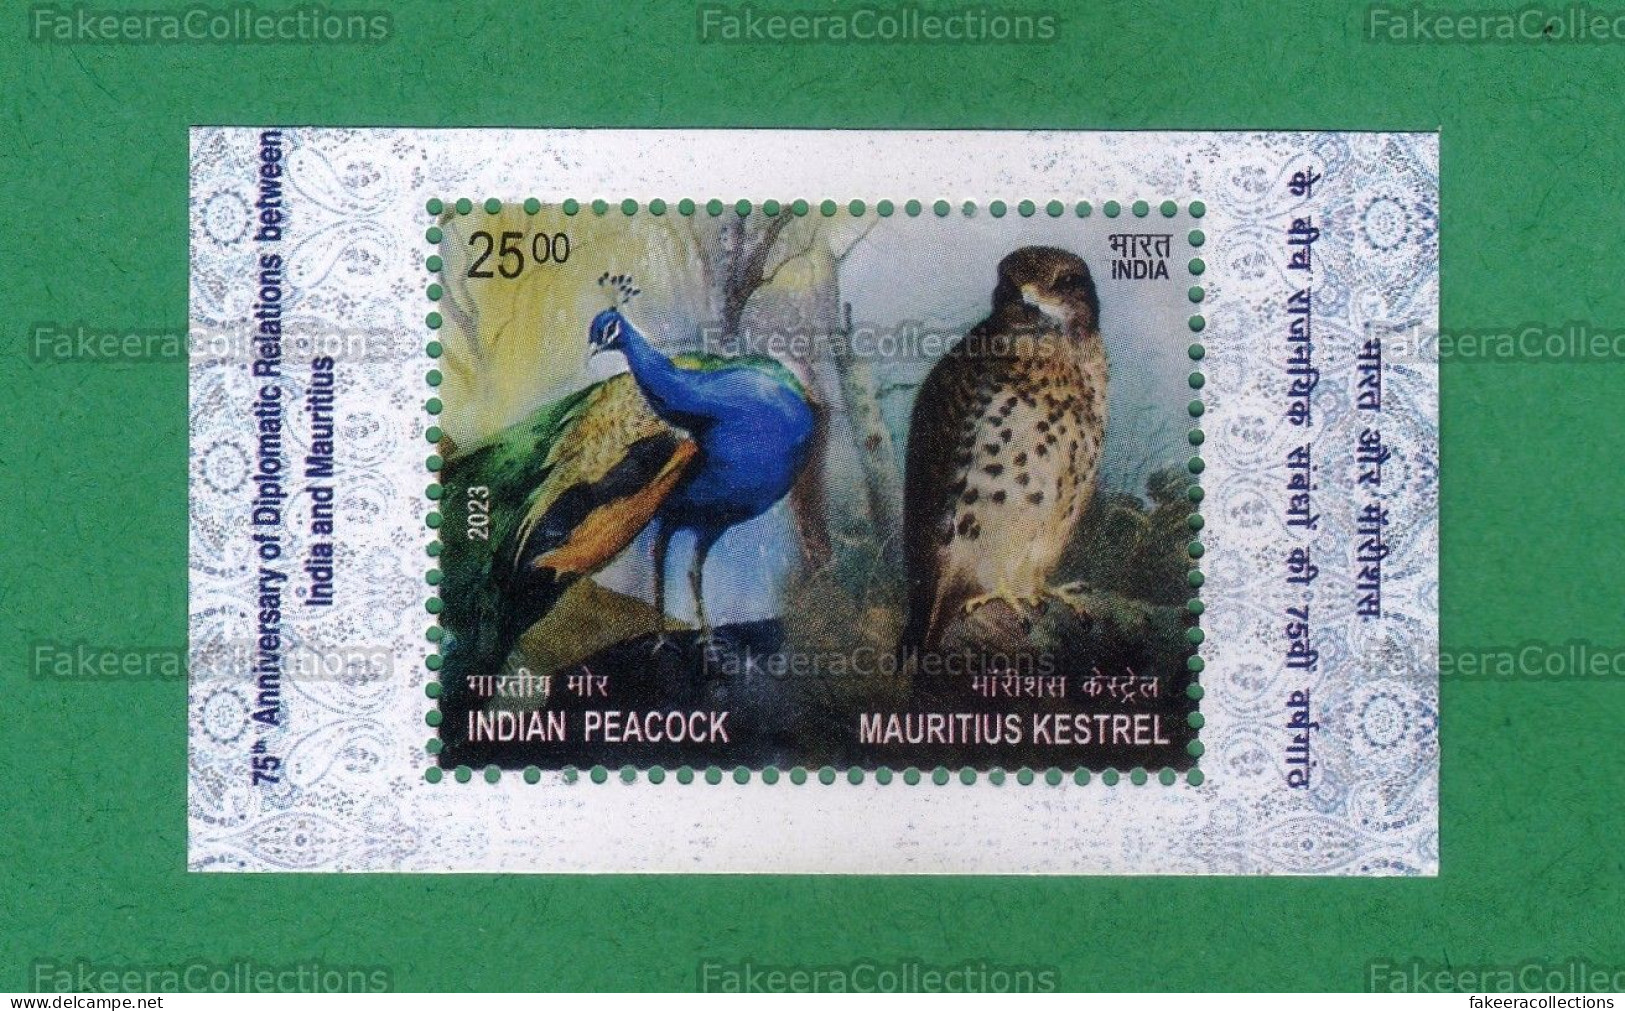 INDIA 2023 Inde Indien - JOINT ISSUE With MAURITIUS - BIRDS 1v M/S MNH ** - INDIAN PEACOCK, KESTREL, Diplomatic Relation - Eagles & Birds Of Prey